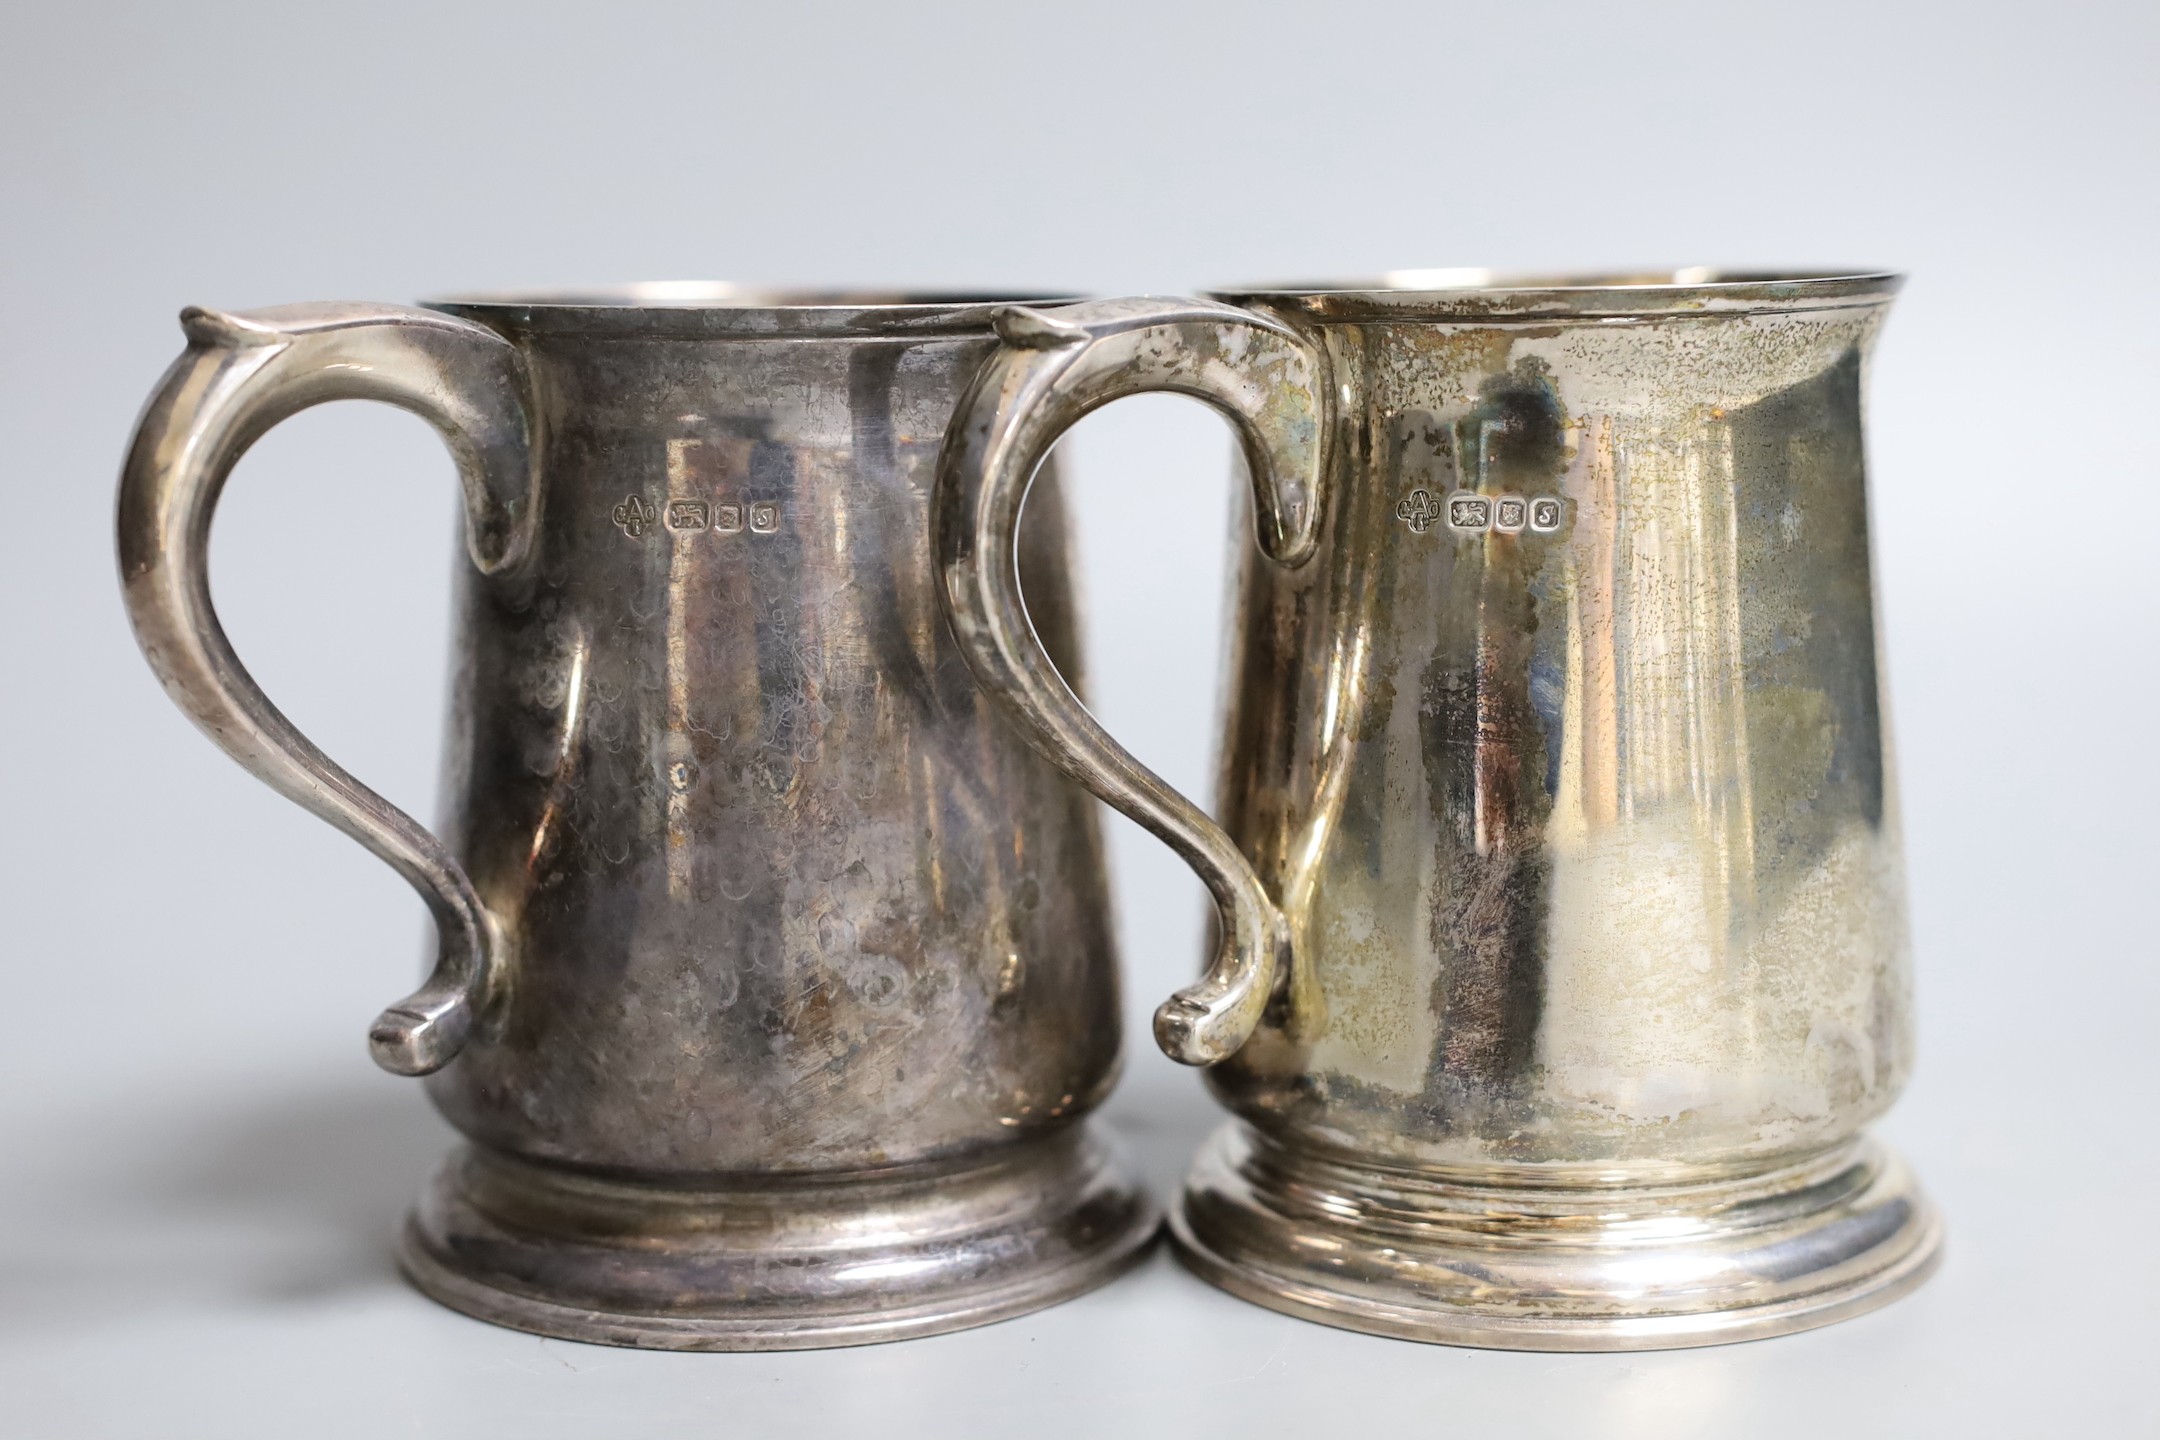 A pair 1970's silver mugs with S-scroll handles, by Asprey & Co Ltd, London, 1973, height 10.8cm, 18.5oz, both with engraved monograms